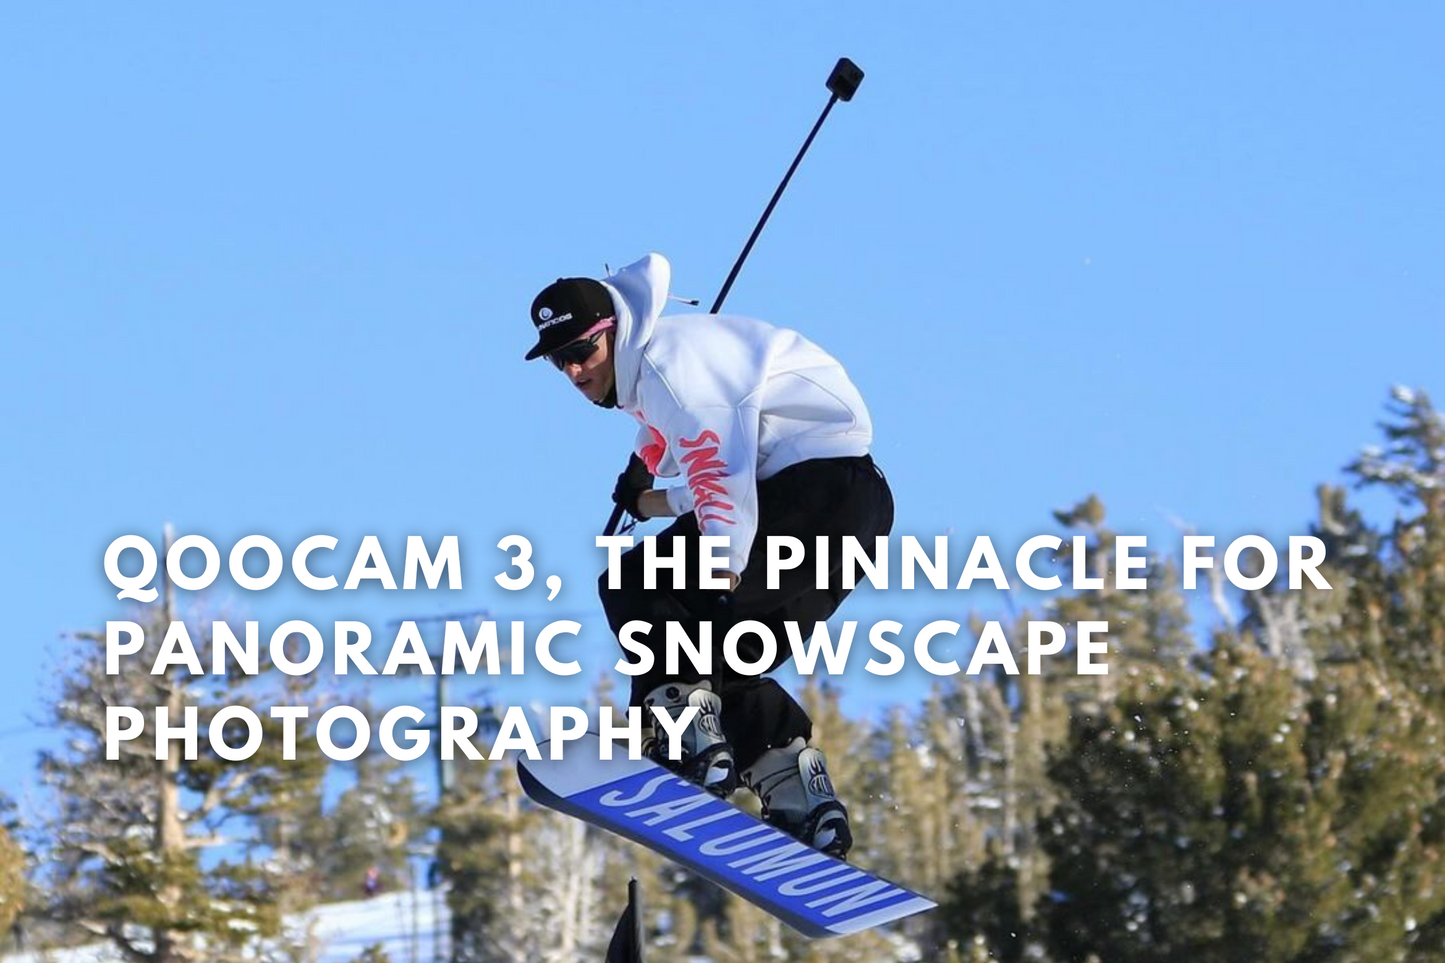 Embark on the Ultimate Adventure: QooCam 3, the Pinnacle for Panoramic Snowscape Photography